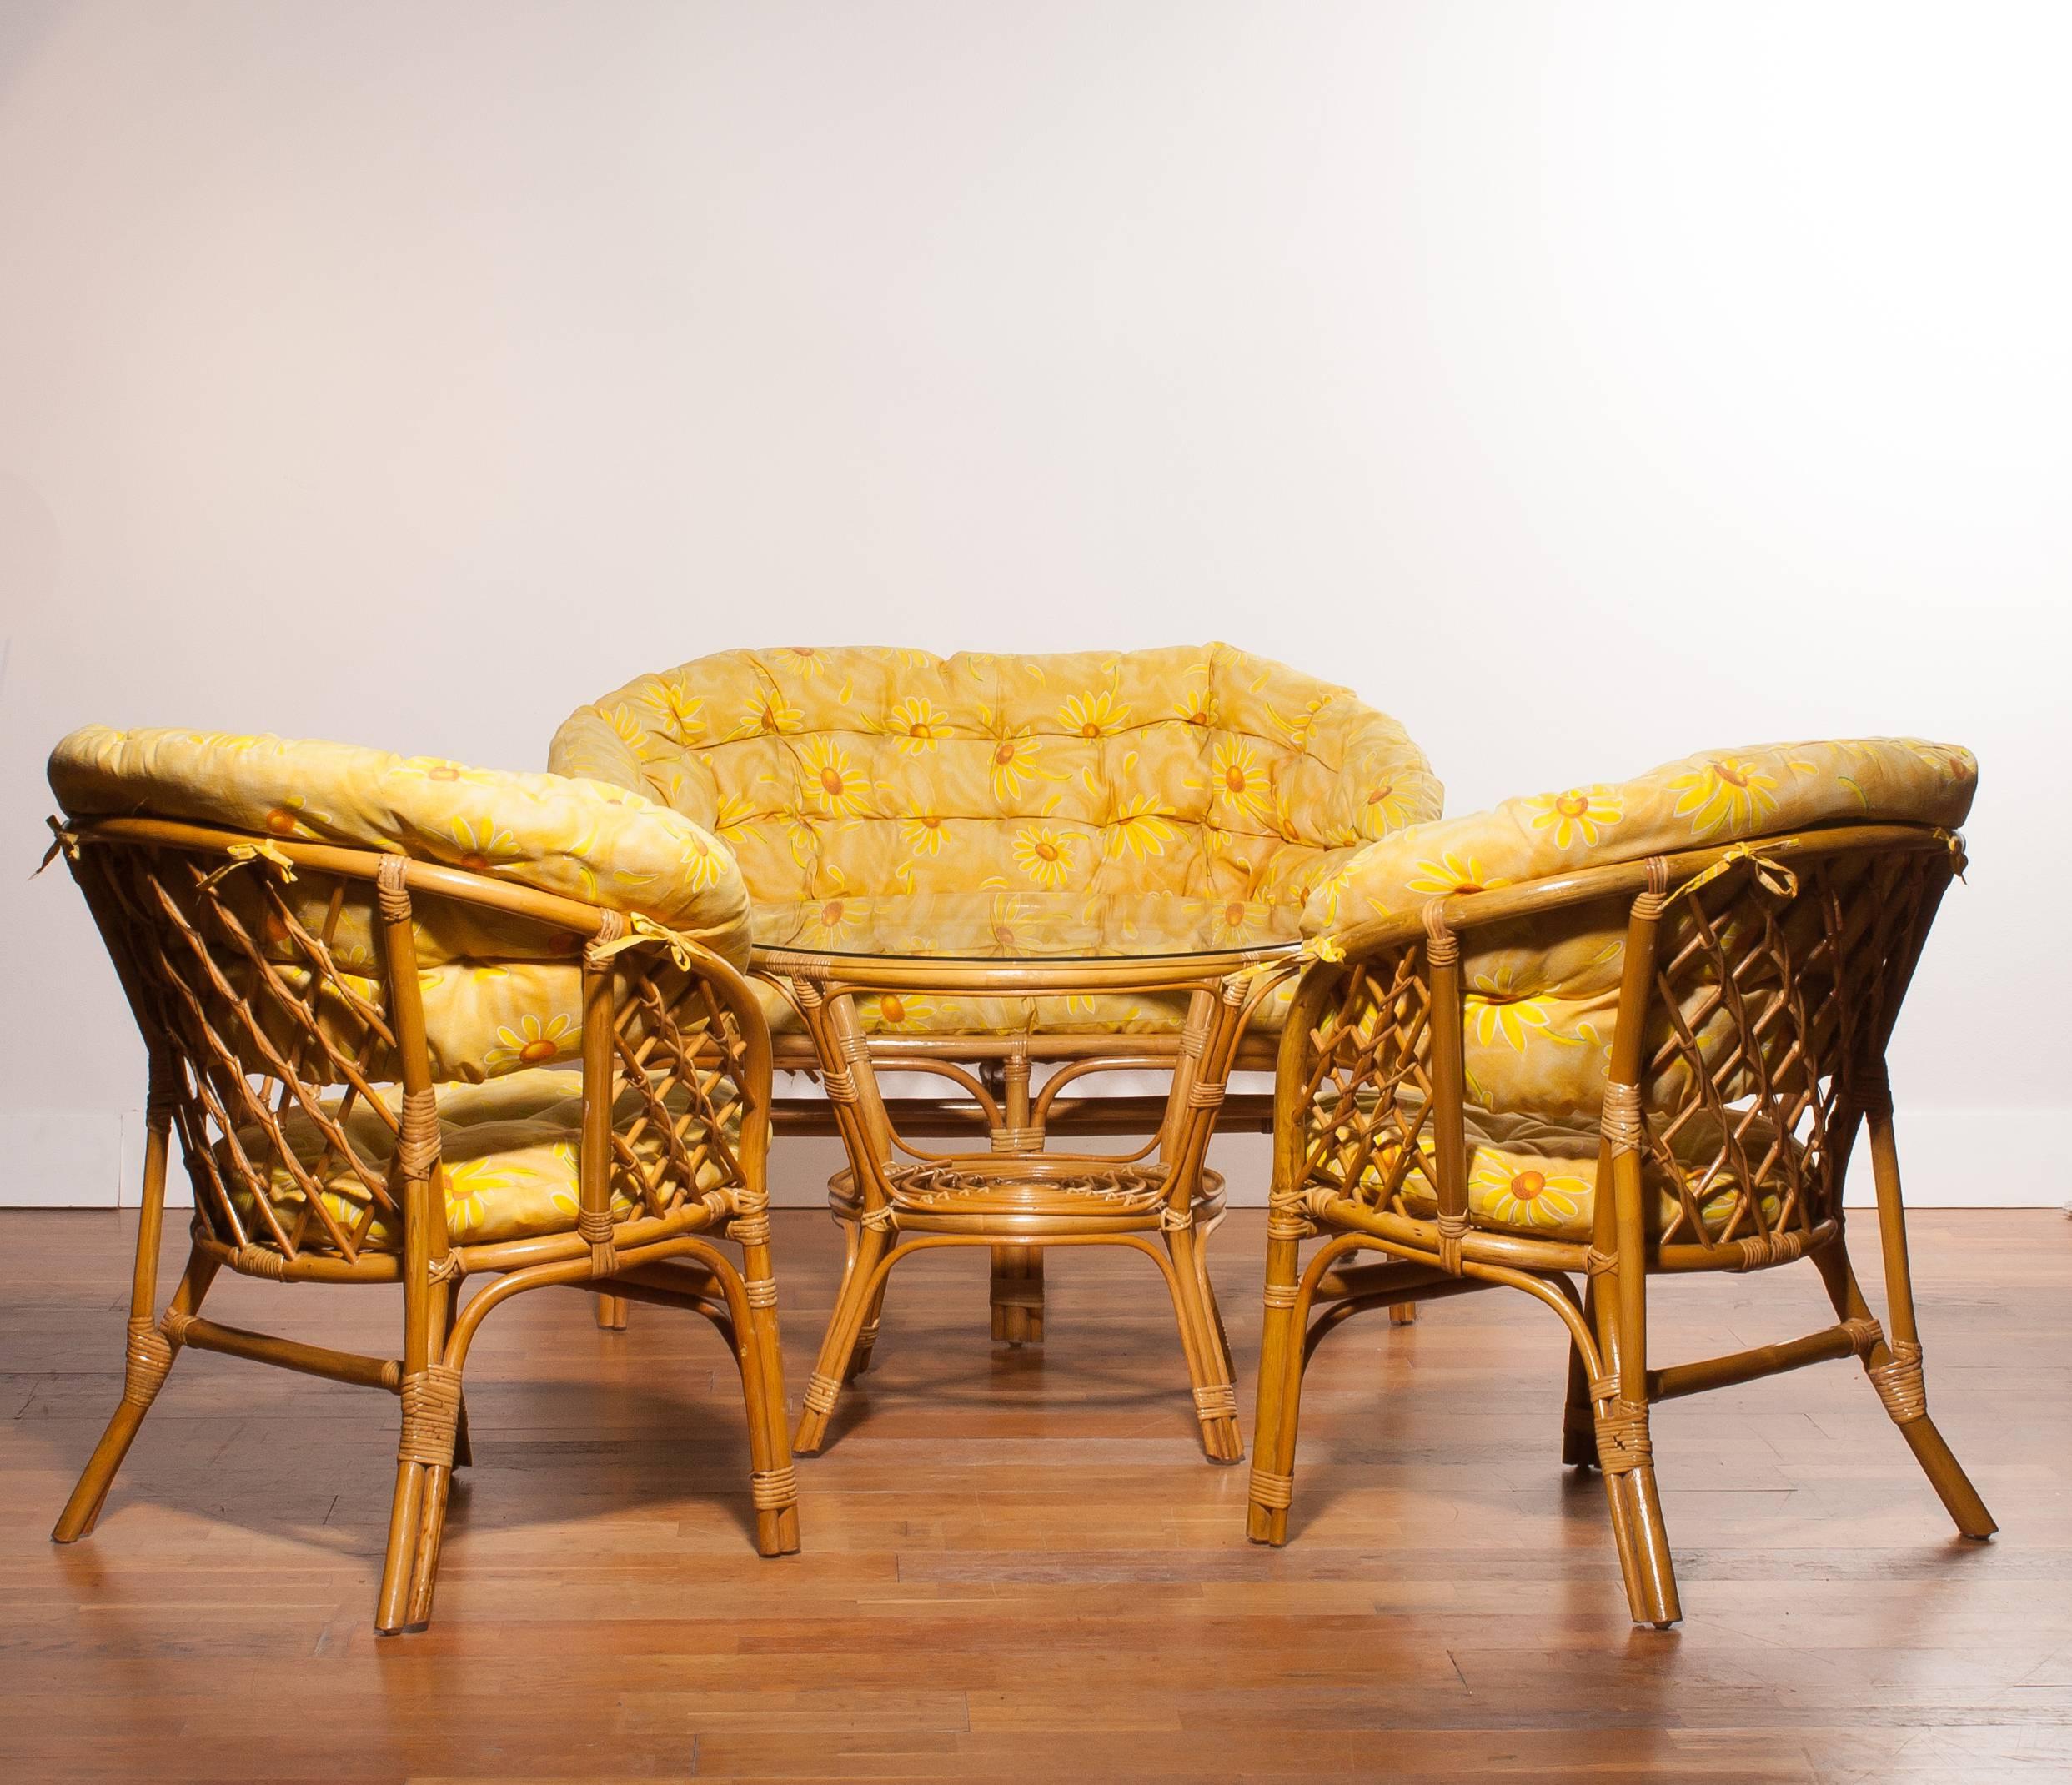 A beautiful rattan garden set consist of a two-seat sofa, two chairs with yellow cushions and a matching round table.
The set is in a very nice condition.
Period 1970s
Dimensions: Sofa H.74 cm , W. 115 cm , D. 60 cm , Sh. 39 cm
 Chair H. 74 cm ,